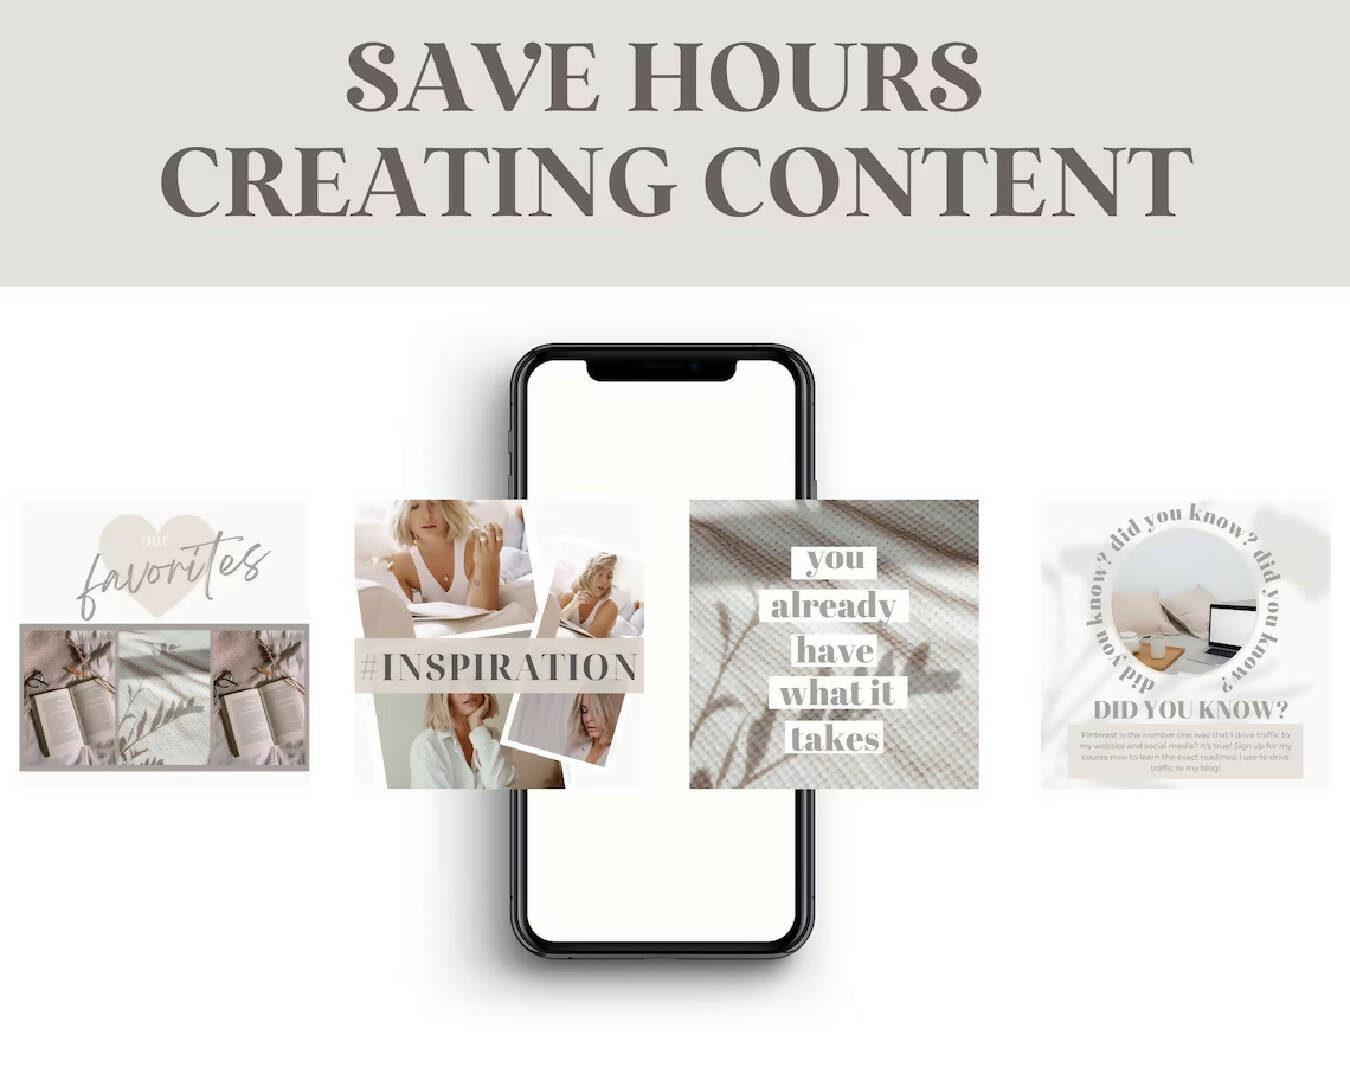 Ultimate 800 Instagram Engagement Booster Post Templates - Business - Coach - Quotes - Canva - Beige - Fashion - Social Media - Blogger